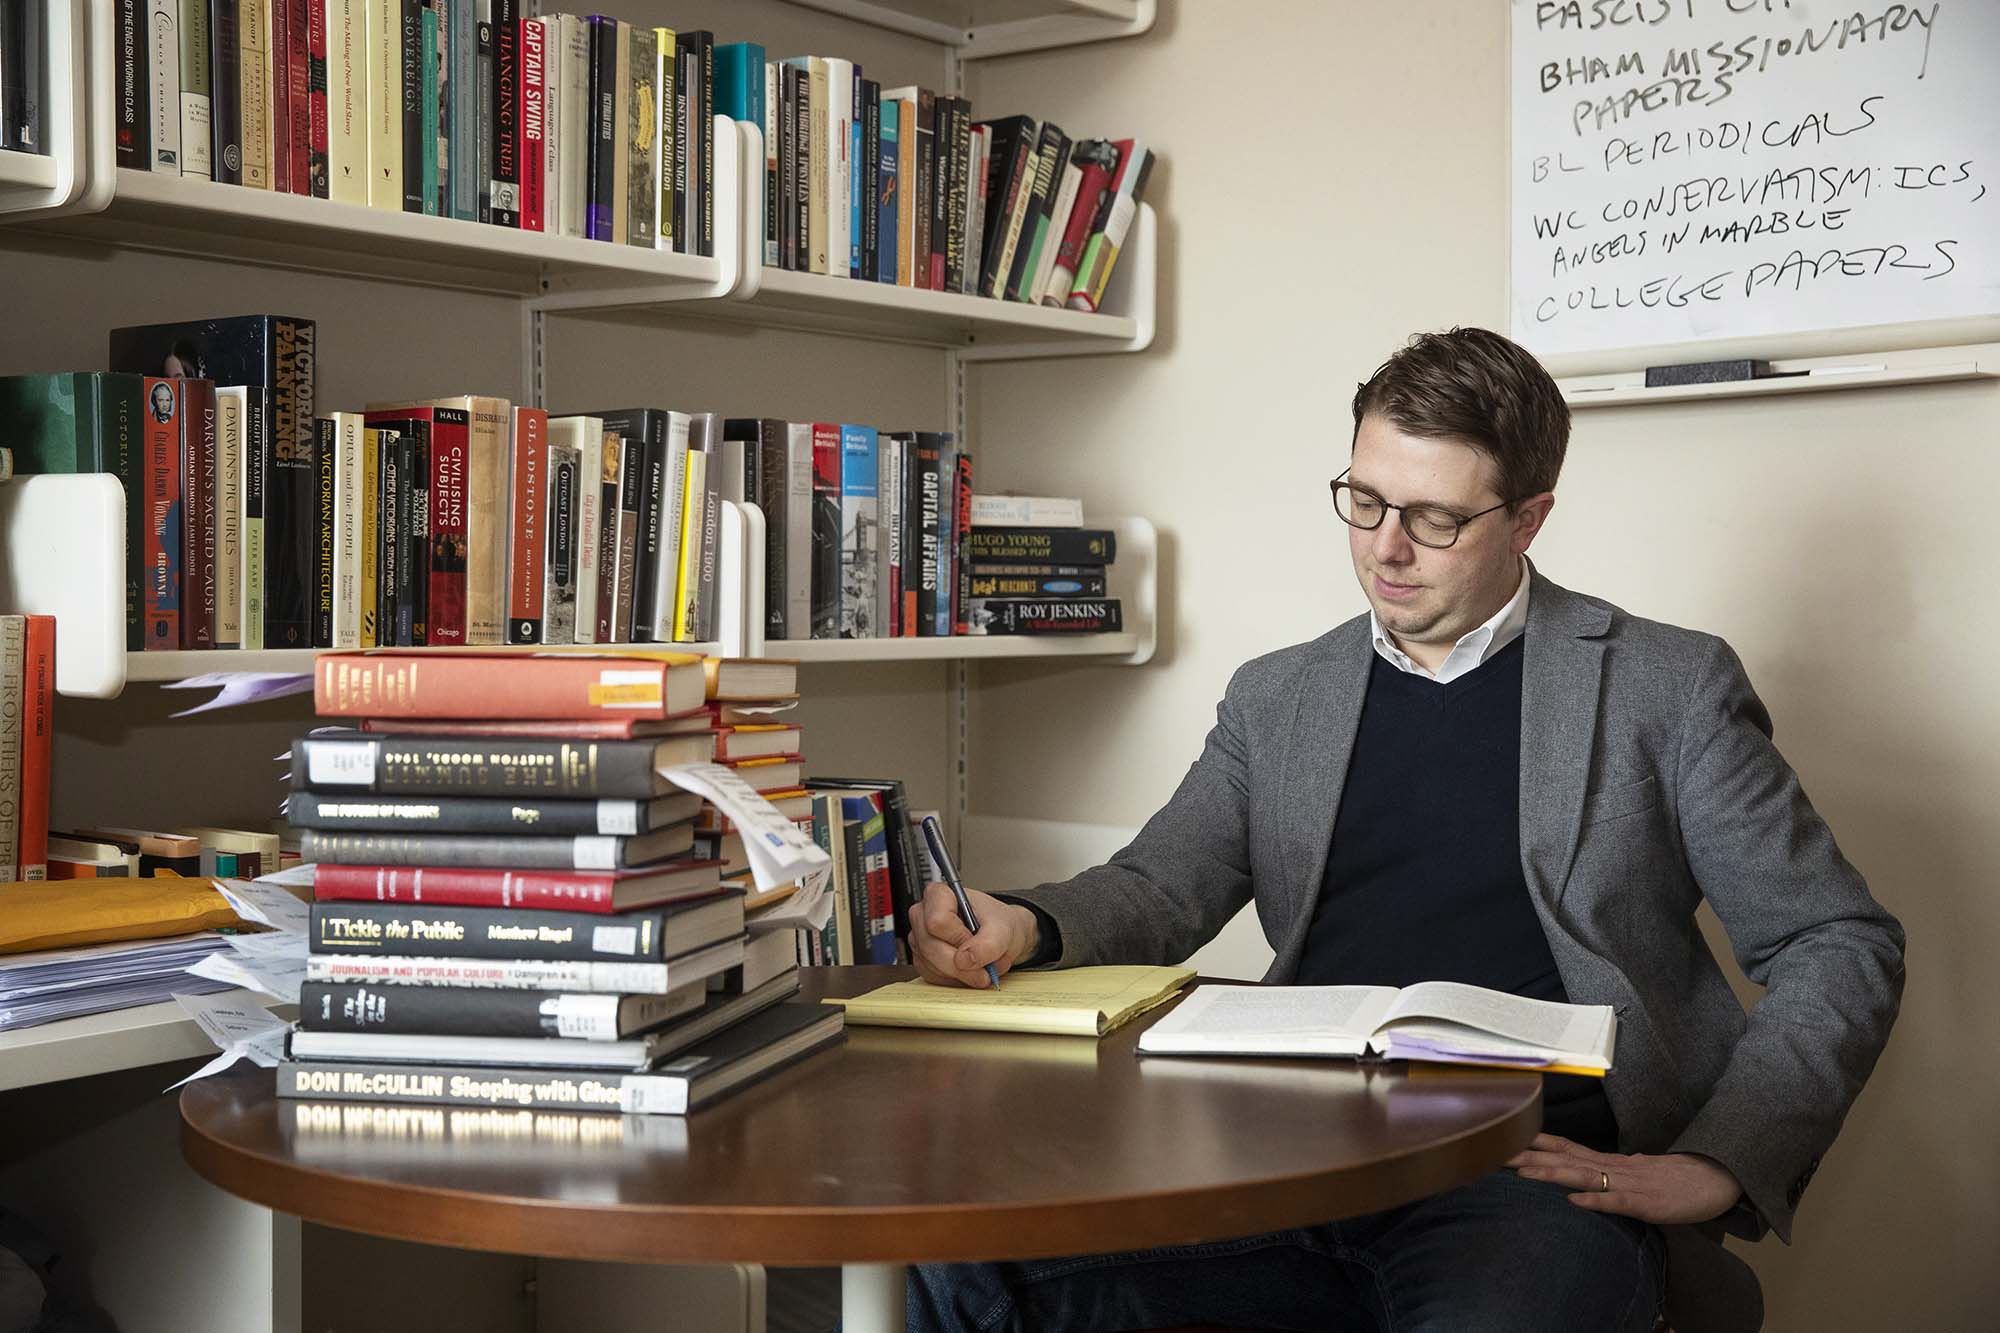 Erik Linstrum sitting at a table with a stack of books writing on a yellow notepad